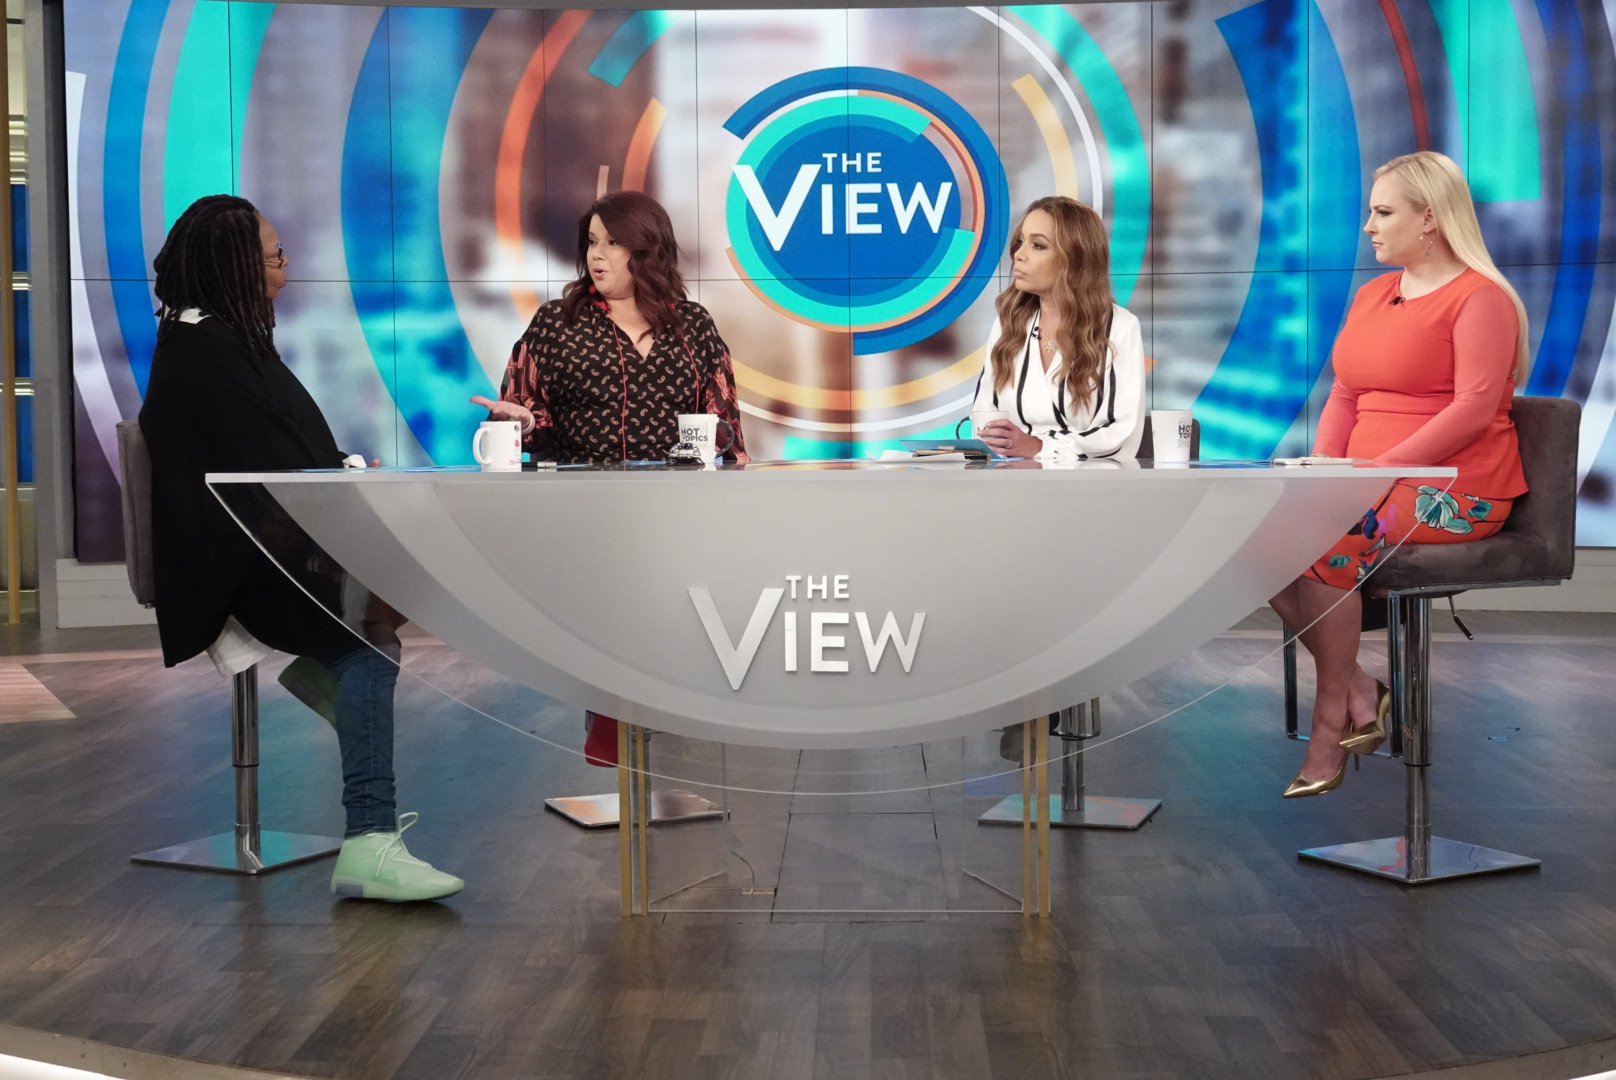 PHOTO: "The View" co-hosts Whoopi Goldberg, Ana Navarro, Sunny Hostin, and Meghan McCain on Monday, June 10, 2019, discussing the possible backlash Biden could receive after reversing his stance on the Hyde Amendment.